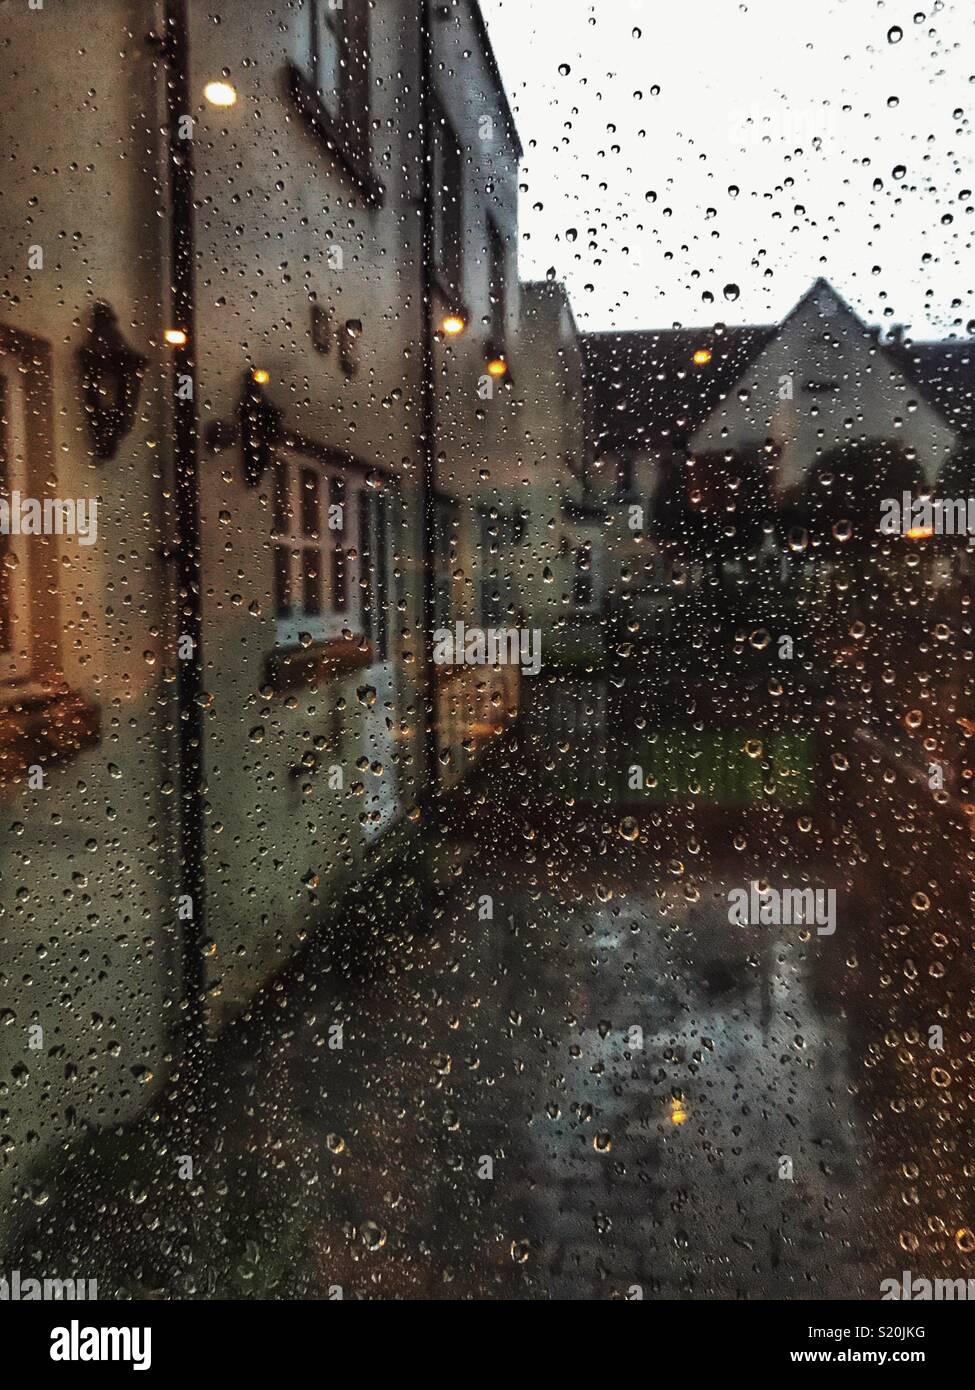 Looking out of a window covered with raindrops, in residential area with lights in the early evening Stock Photo